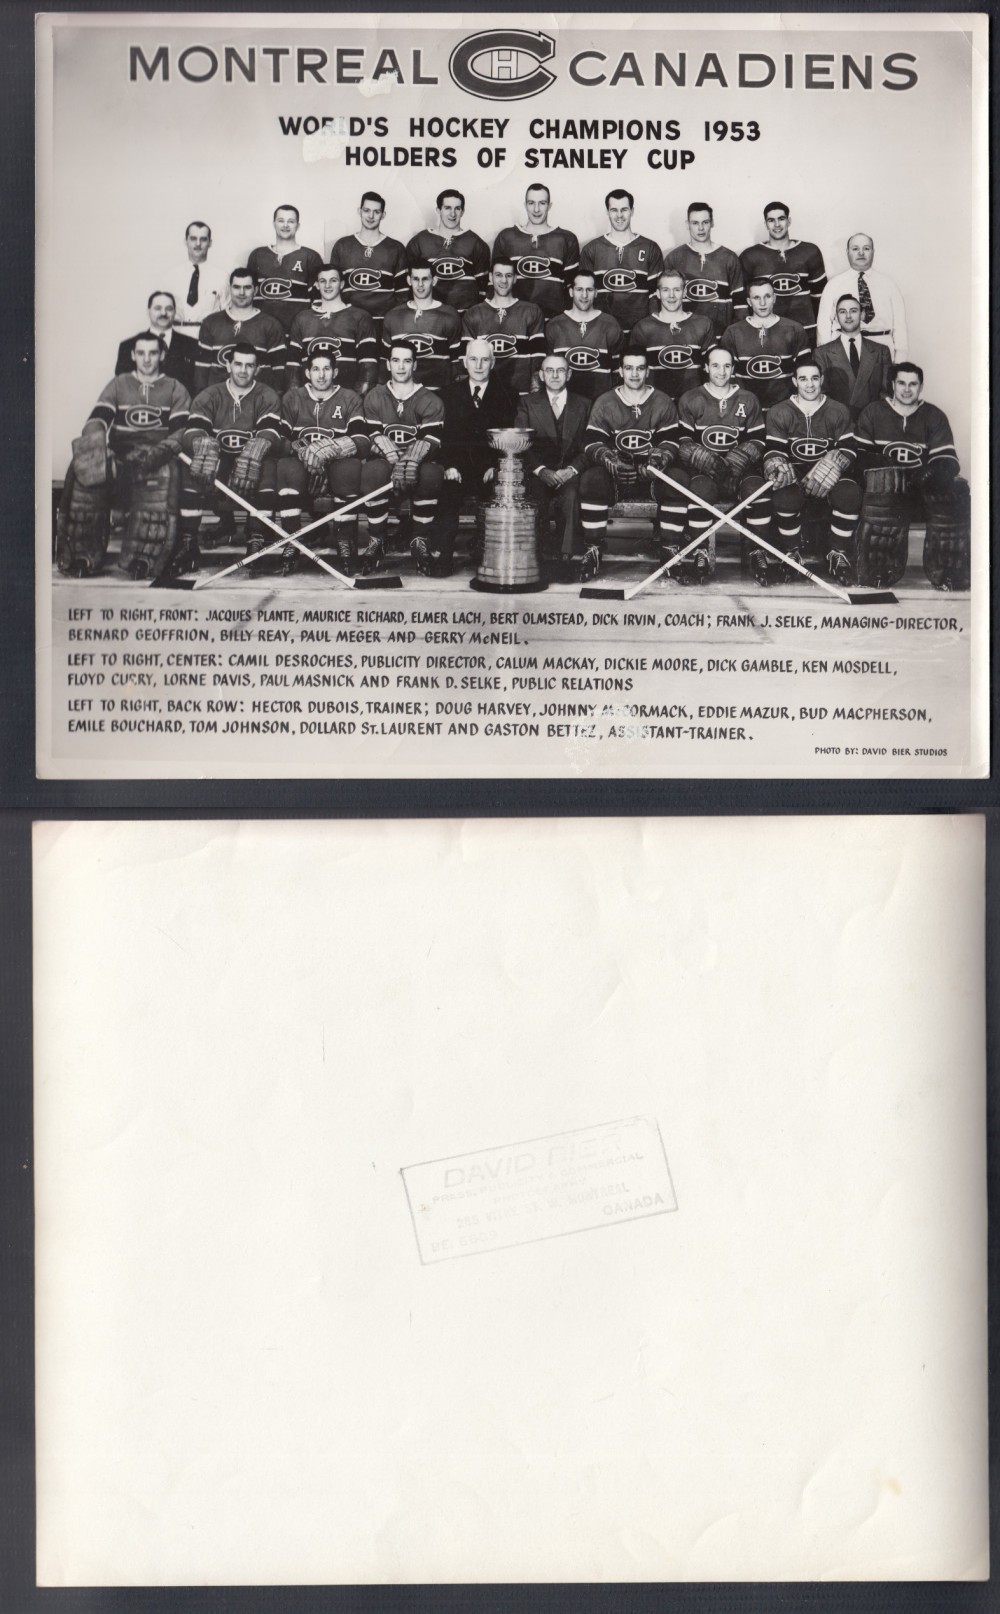 1953 D. BIER MONTREAL CANADIENS STANLEY CUP TEAM PHOTO photo